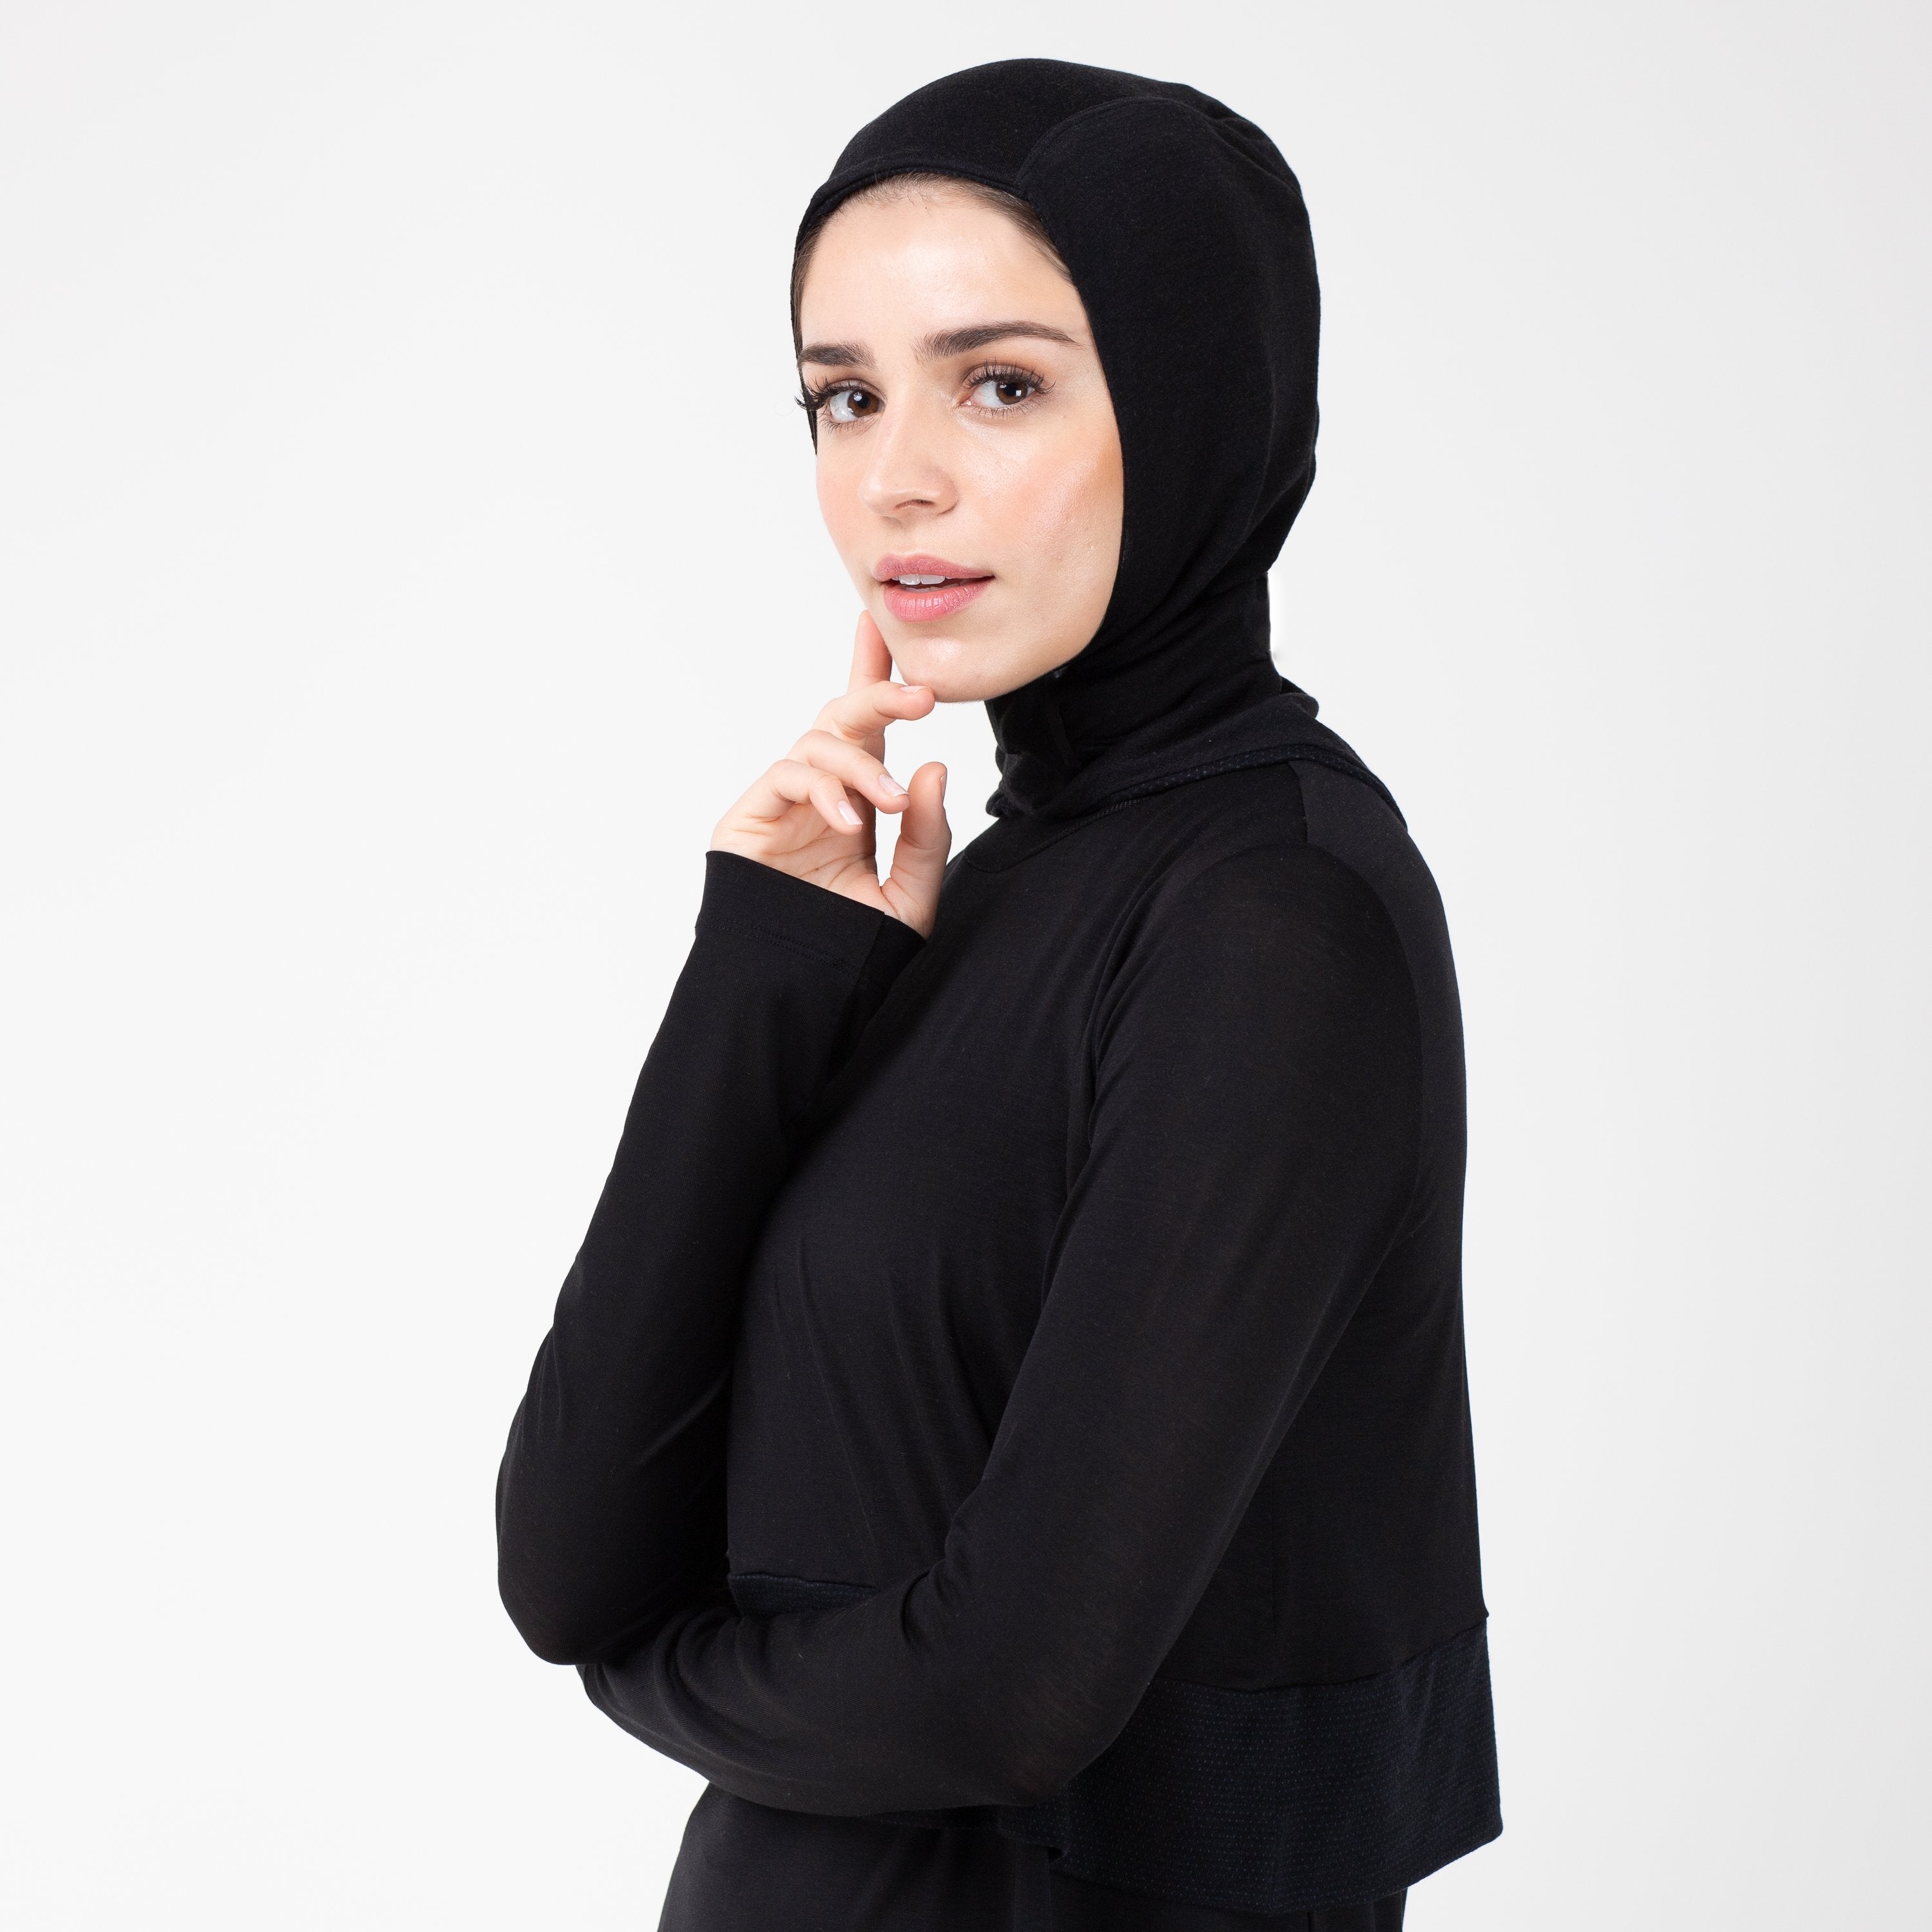 Woman turned to the left wearing a black shirt with a matching black HAWA hijab touching her face with her right hand.